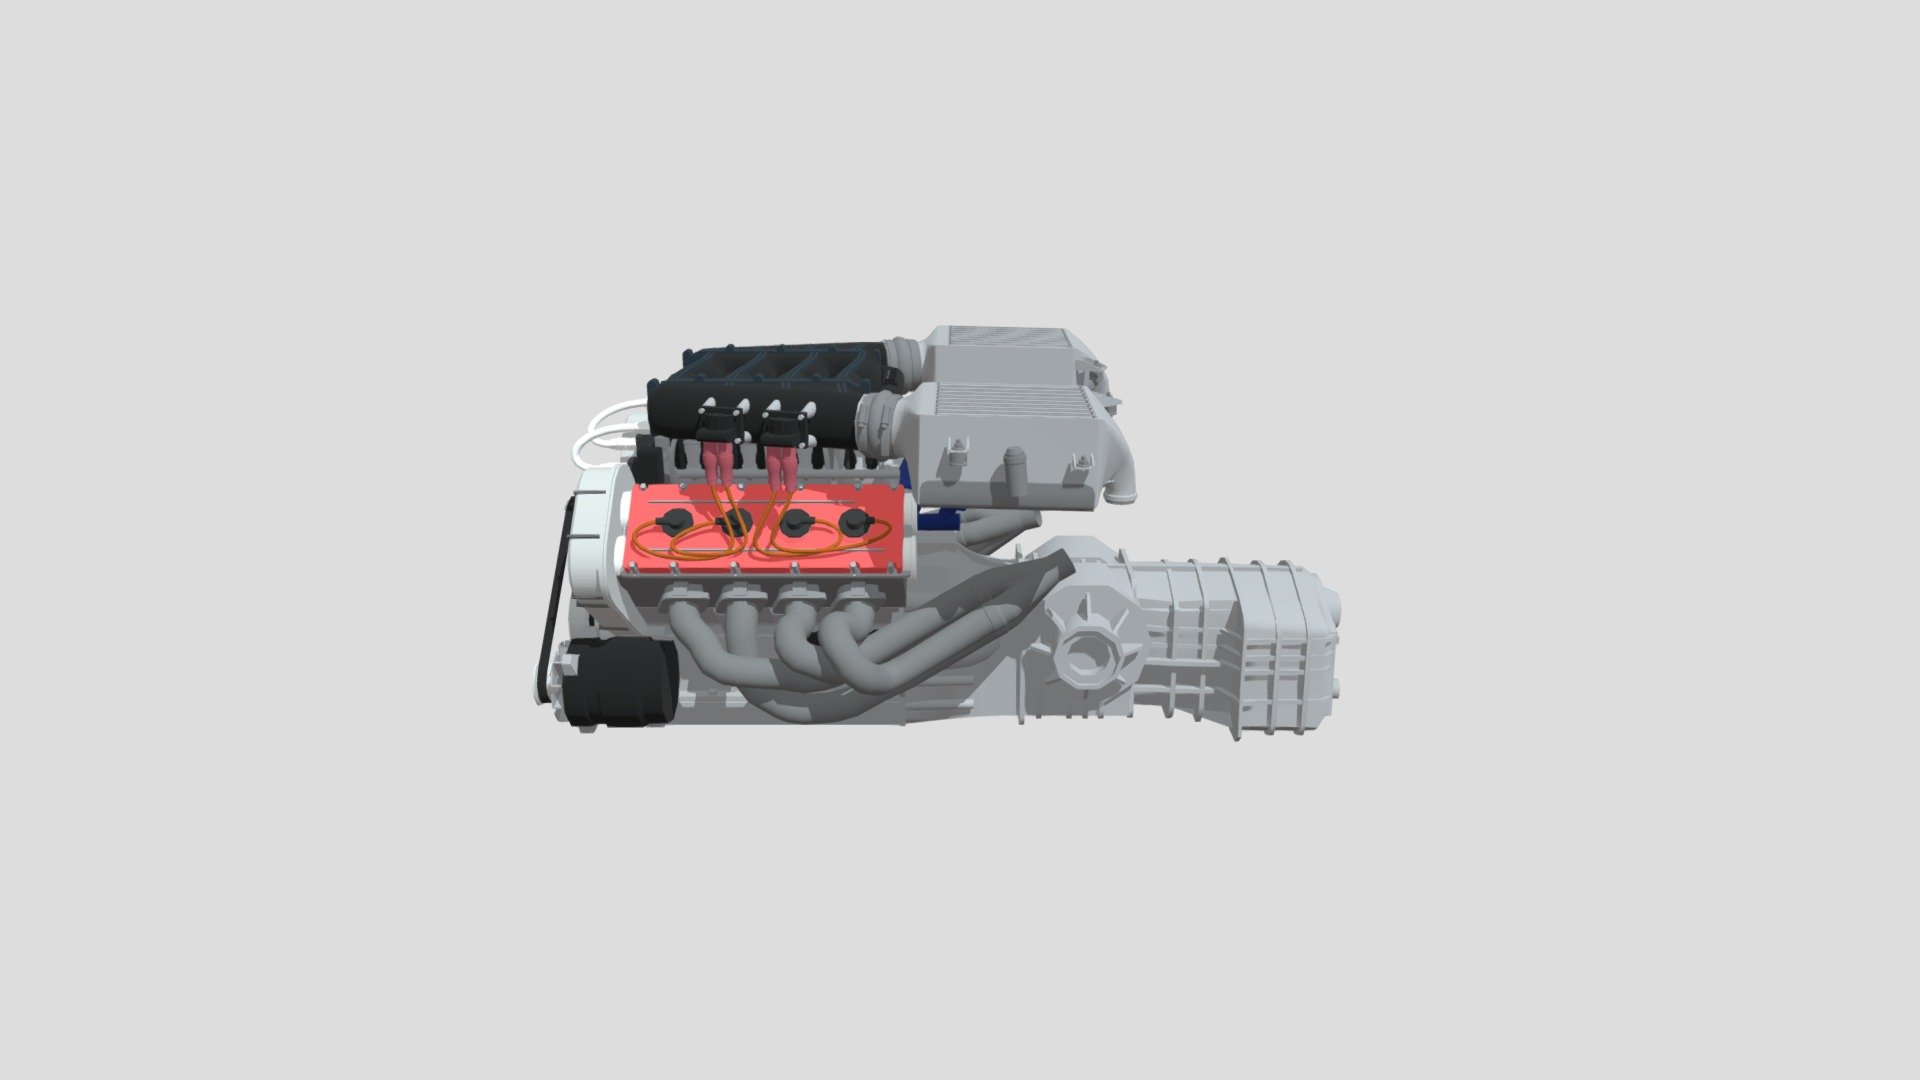 This is my F40 engine that my friend originally created. I lost the blend file due to a malware corruption that I created through my old computer but I recently just got a new computer and exported the model from Roblox to export onto here so now it'll look OBJ sadly. The engine is currently created by my main account named &ldquo;Mudusad4